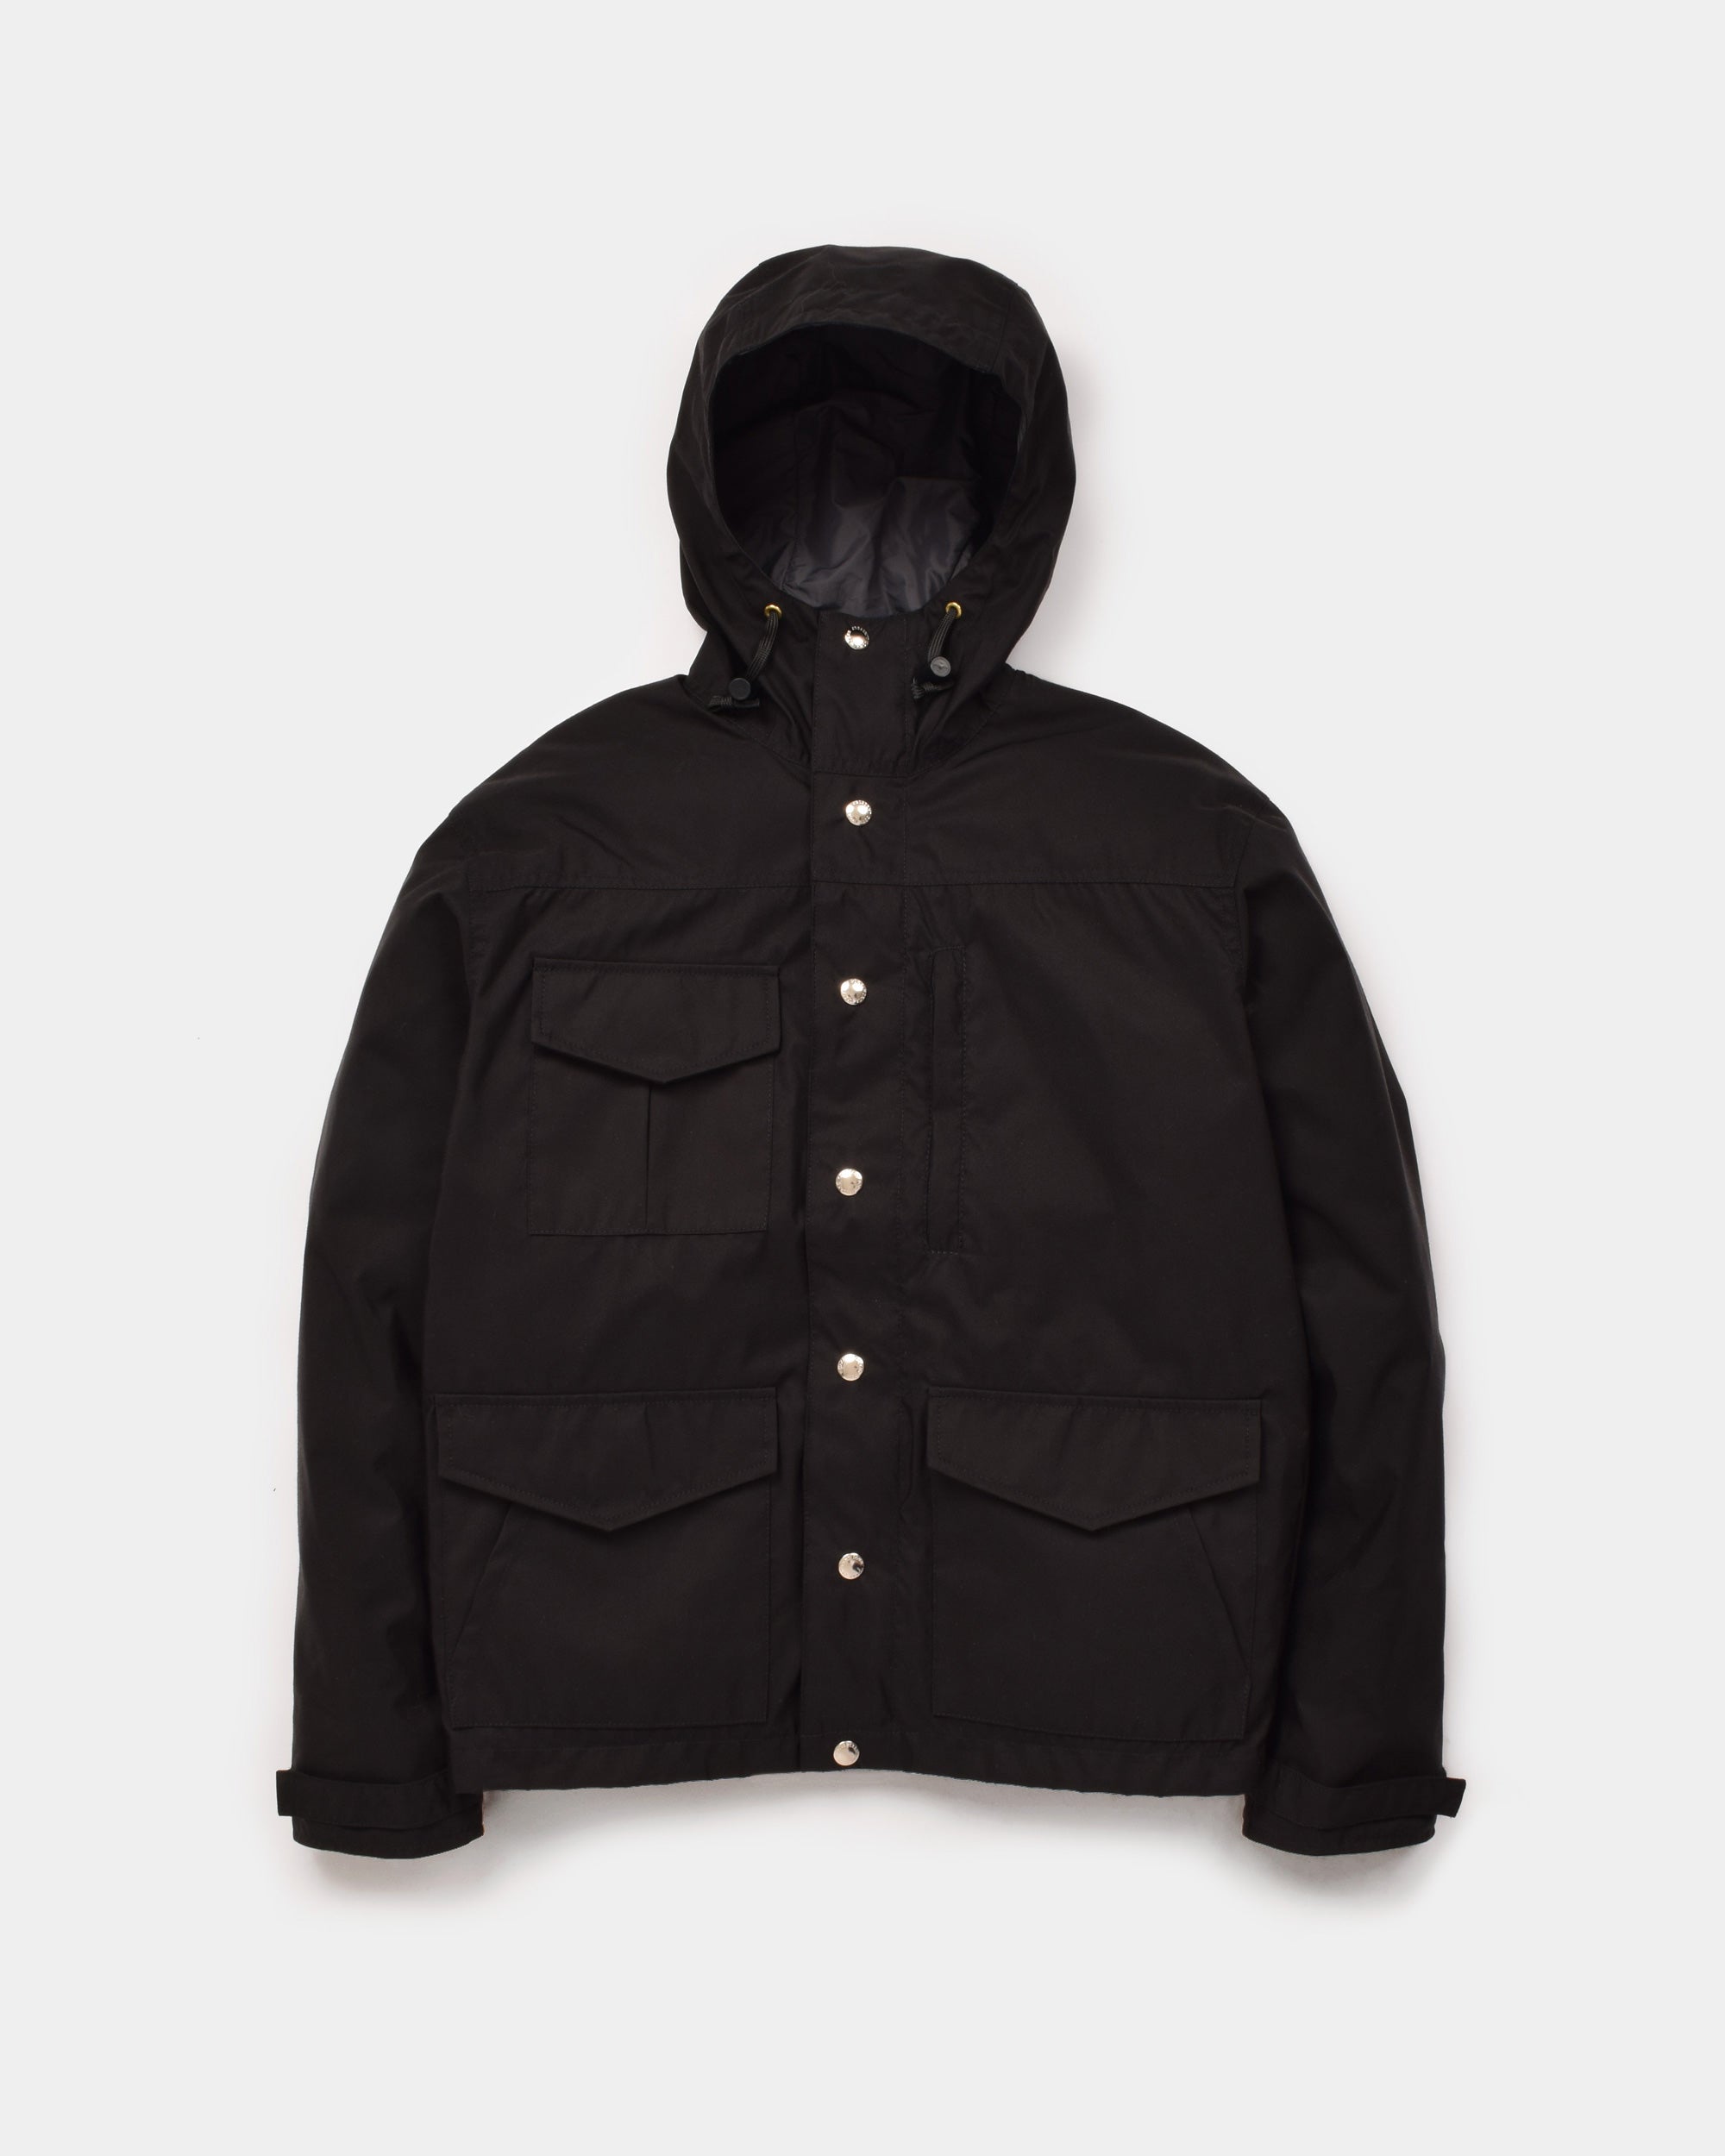 Michi Jacket in Black showing the front